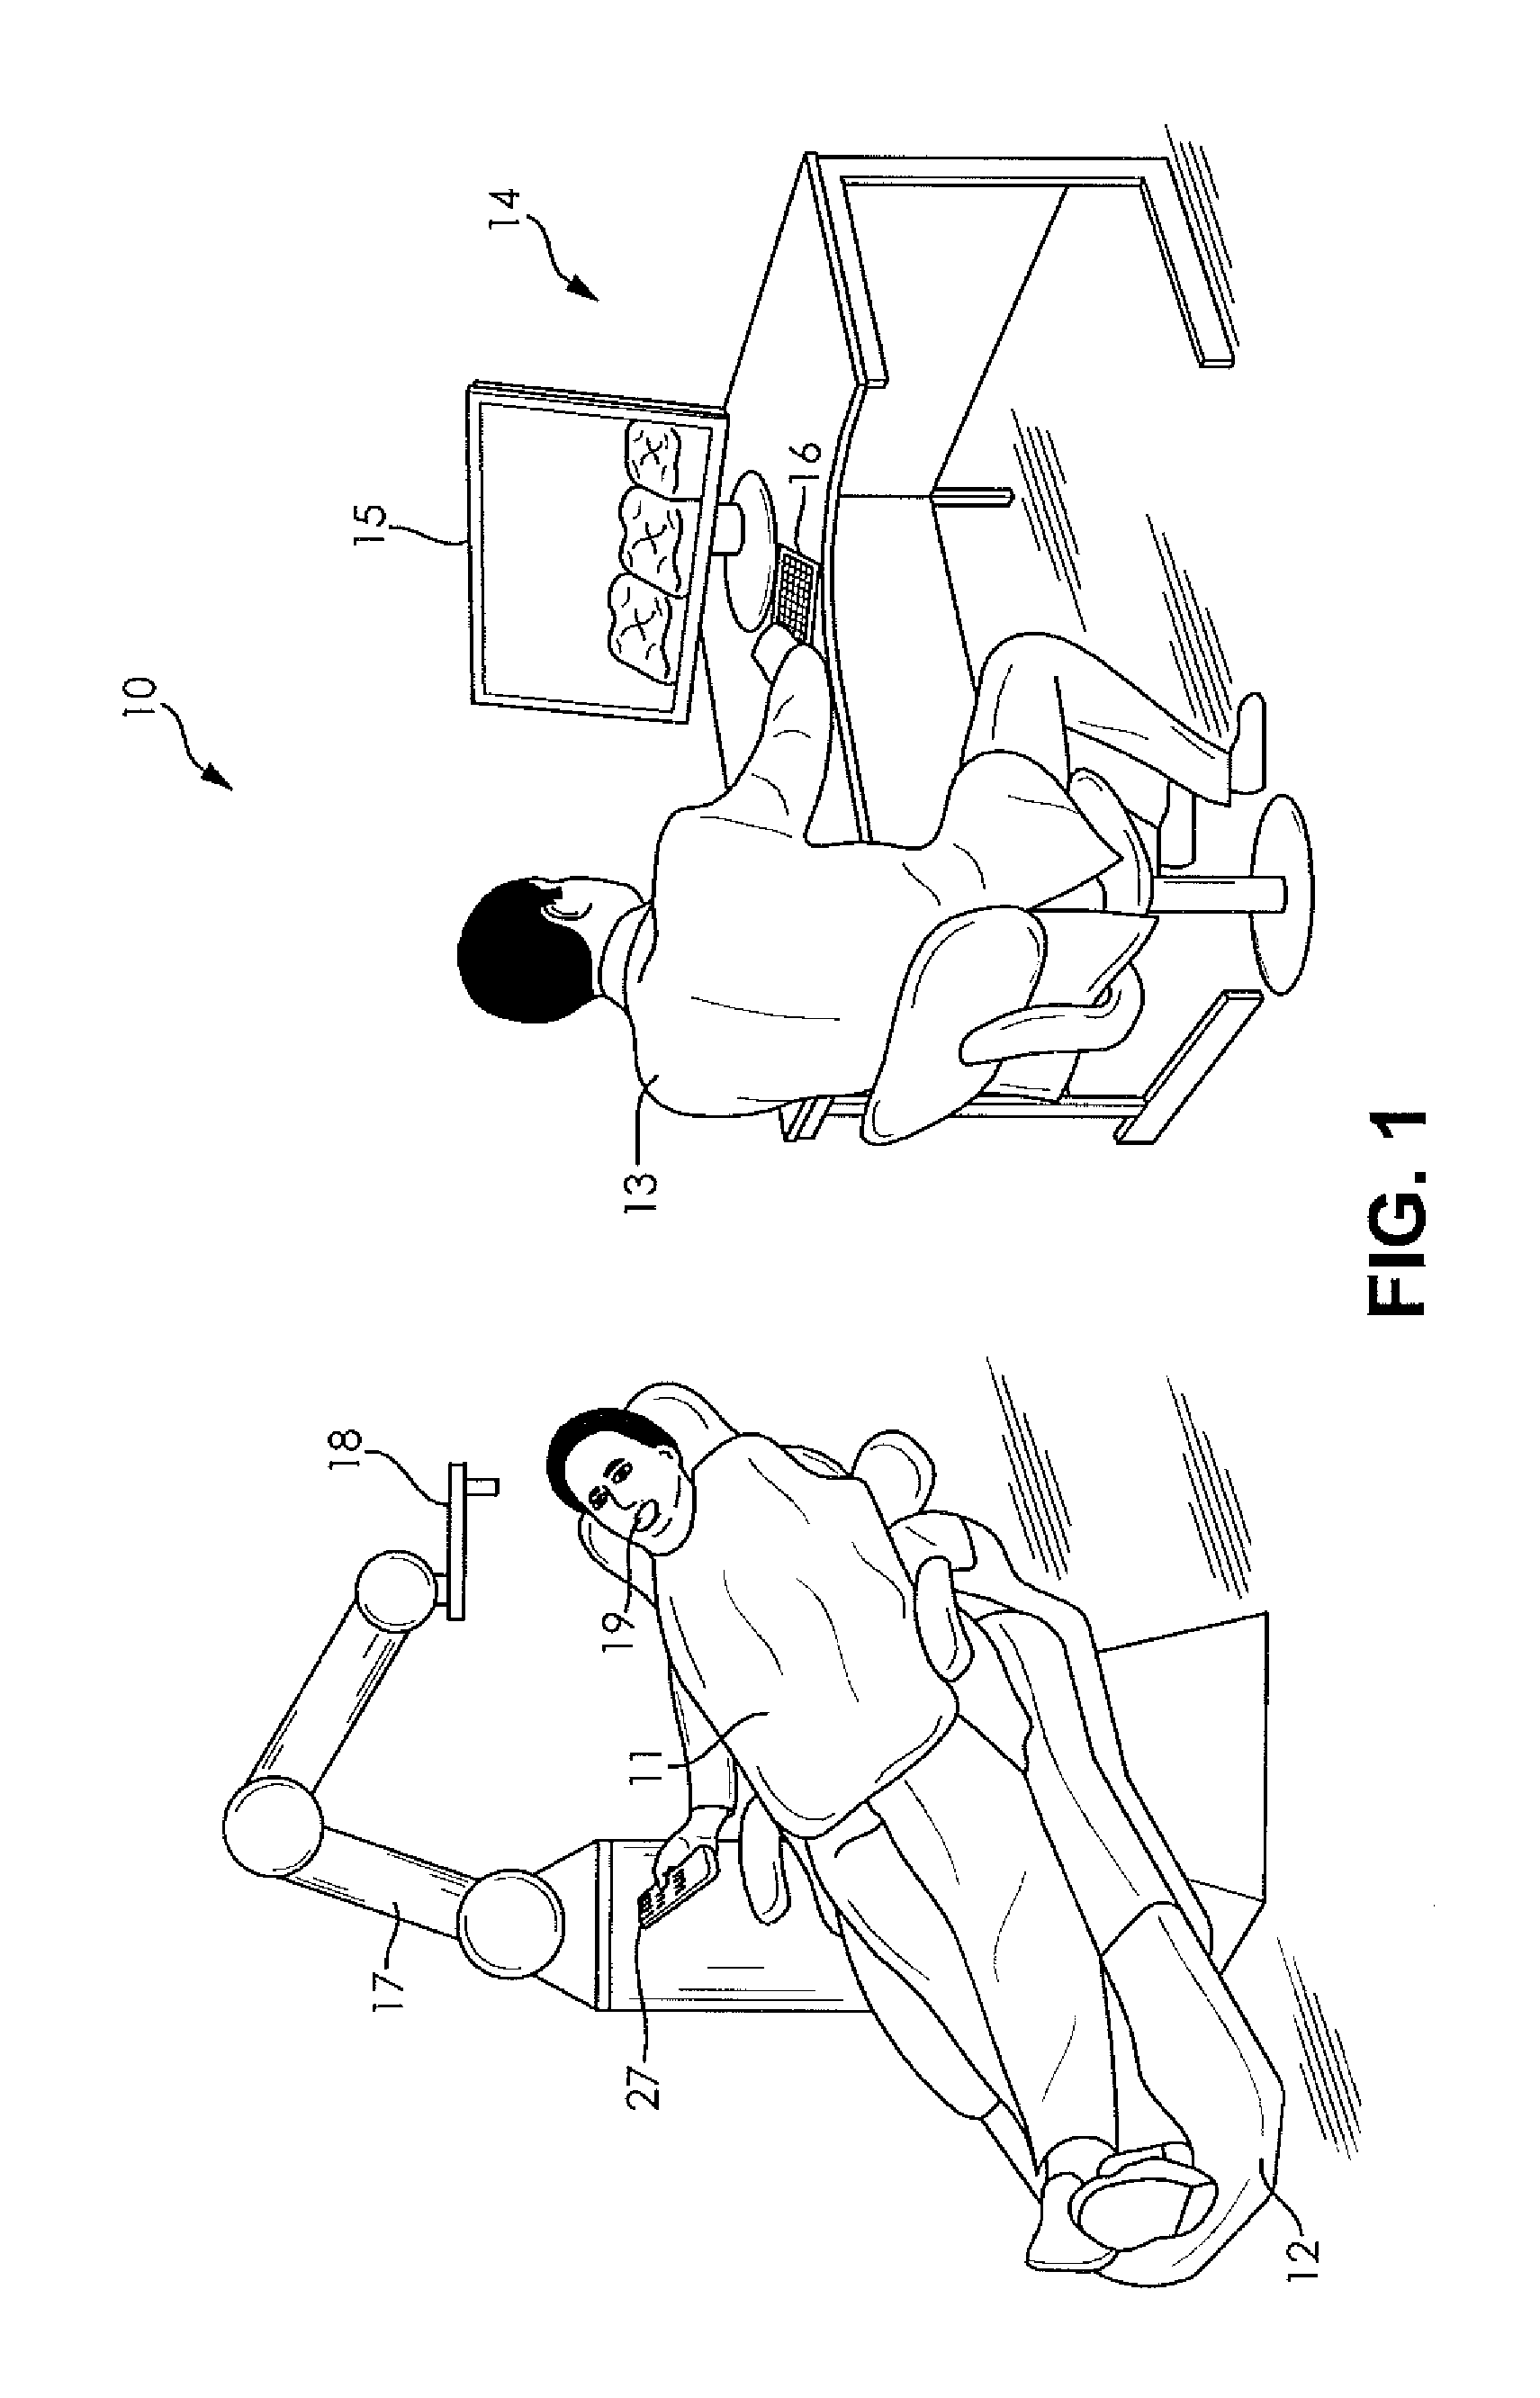 System and method for automating medical procedures